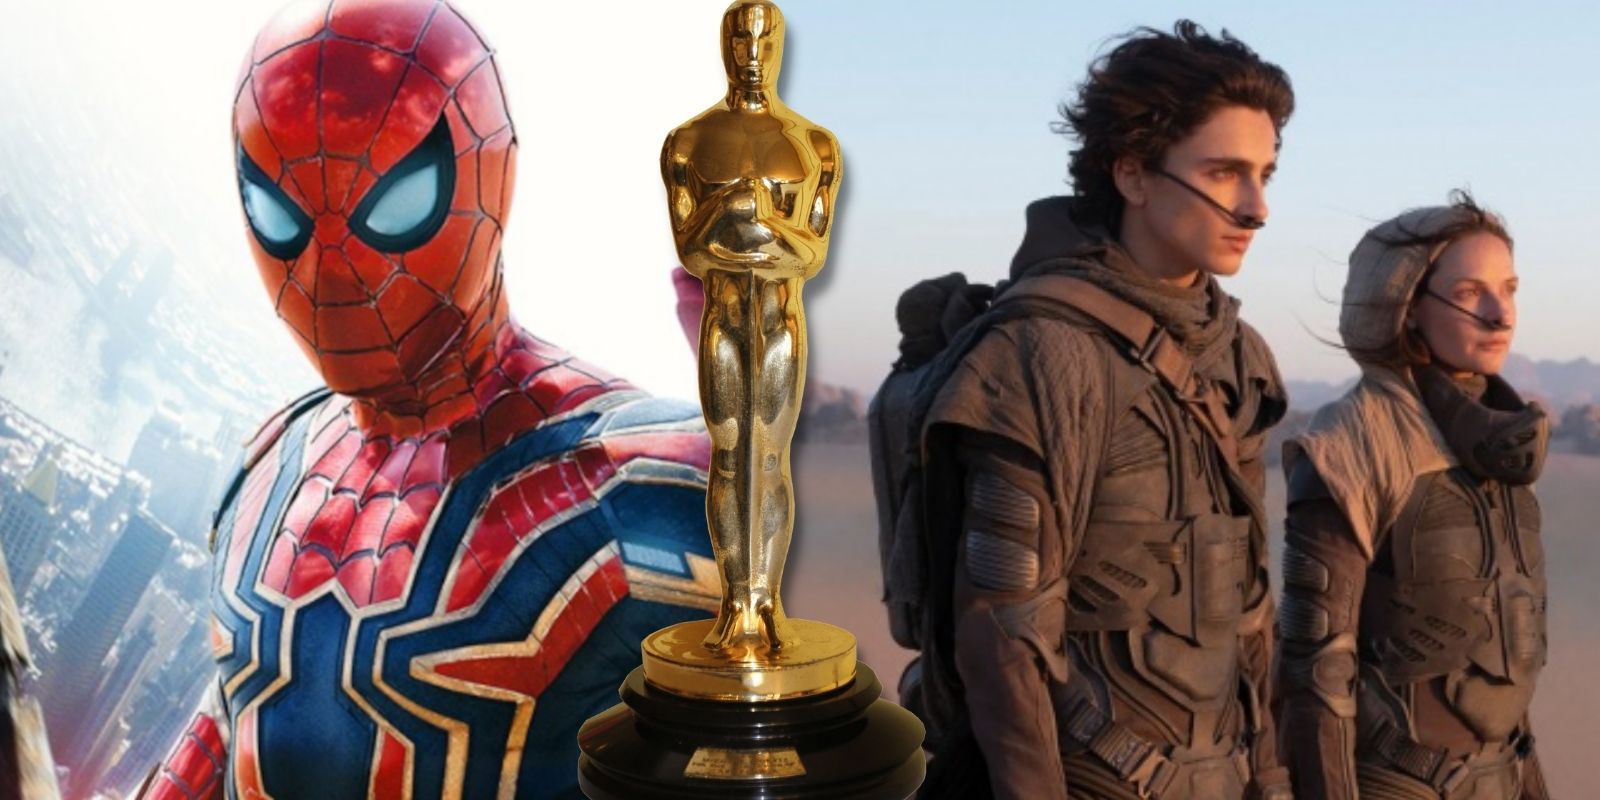 Spider-Man: No Way Home and Dune at the Oscars